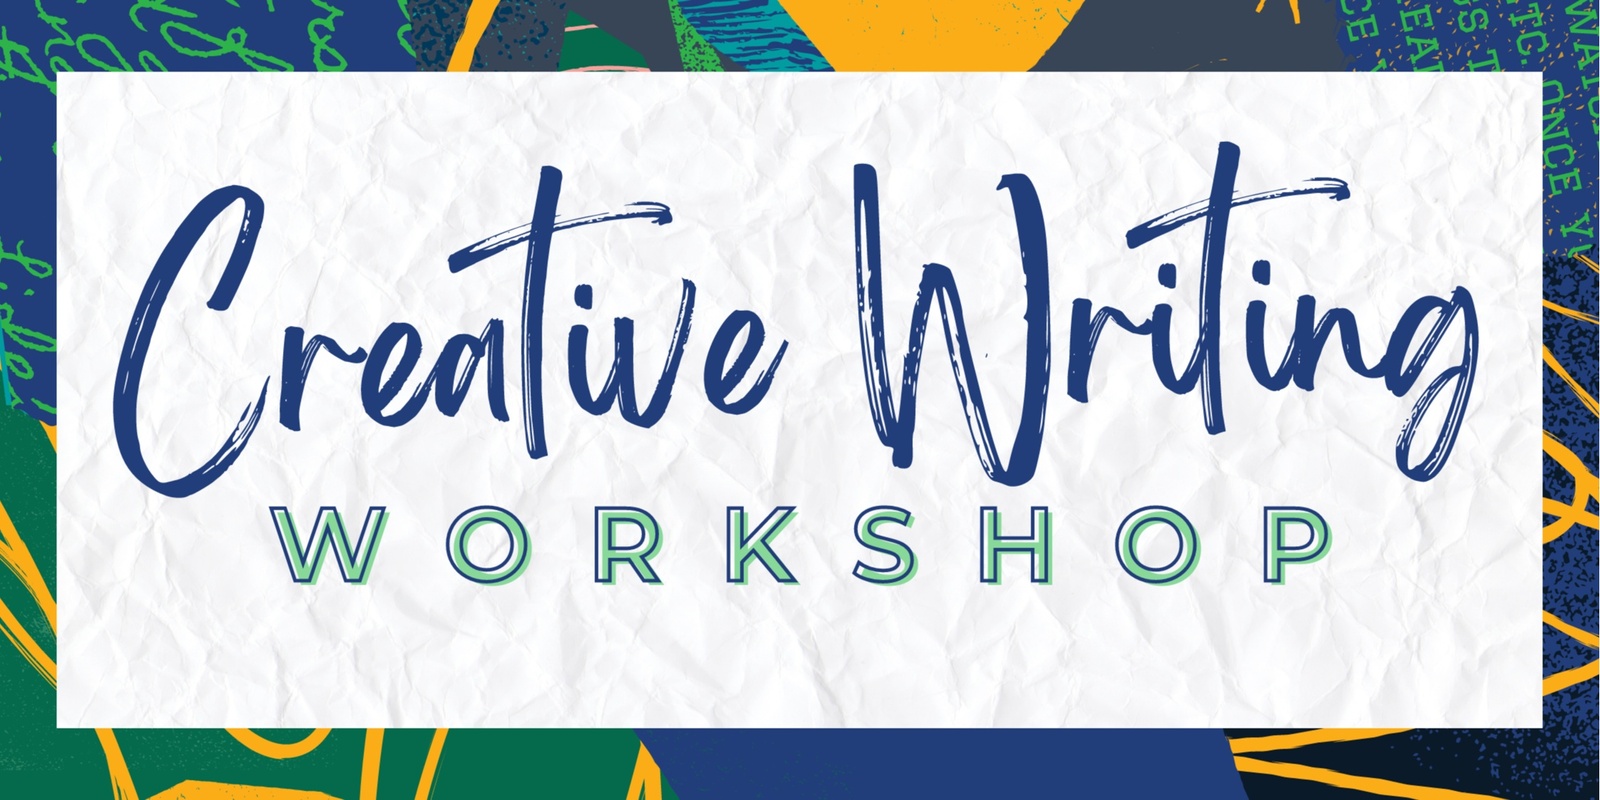 Banner image for Eidsvold - Creative Writing Workshop with Maxene Cooper